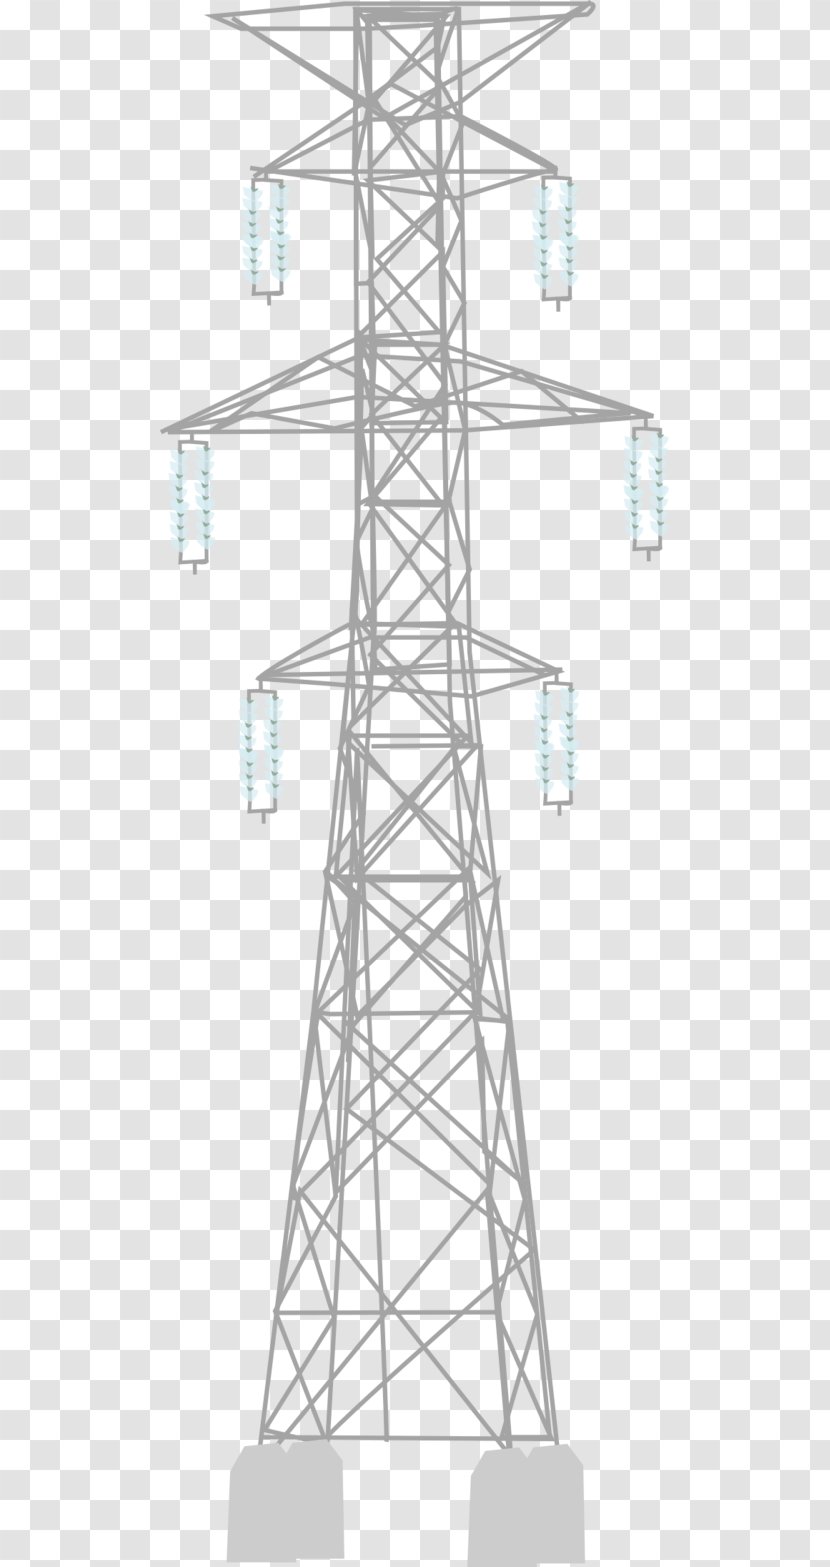 Electricity Transmission Tower Insulator High Voltage Overhead Power Line - Electric Transparent PNG